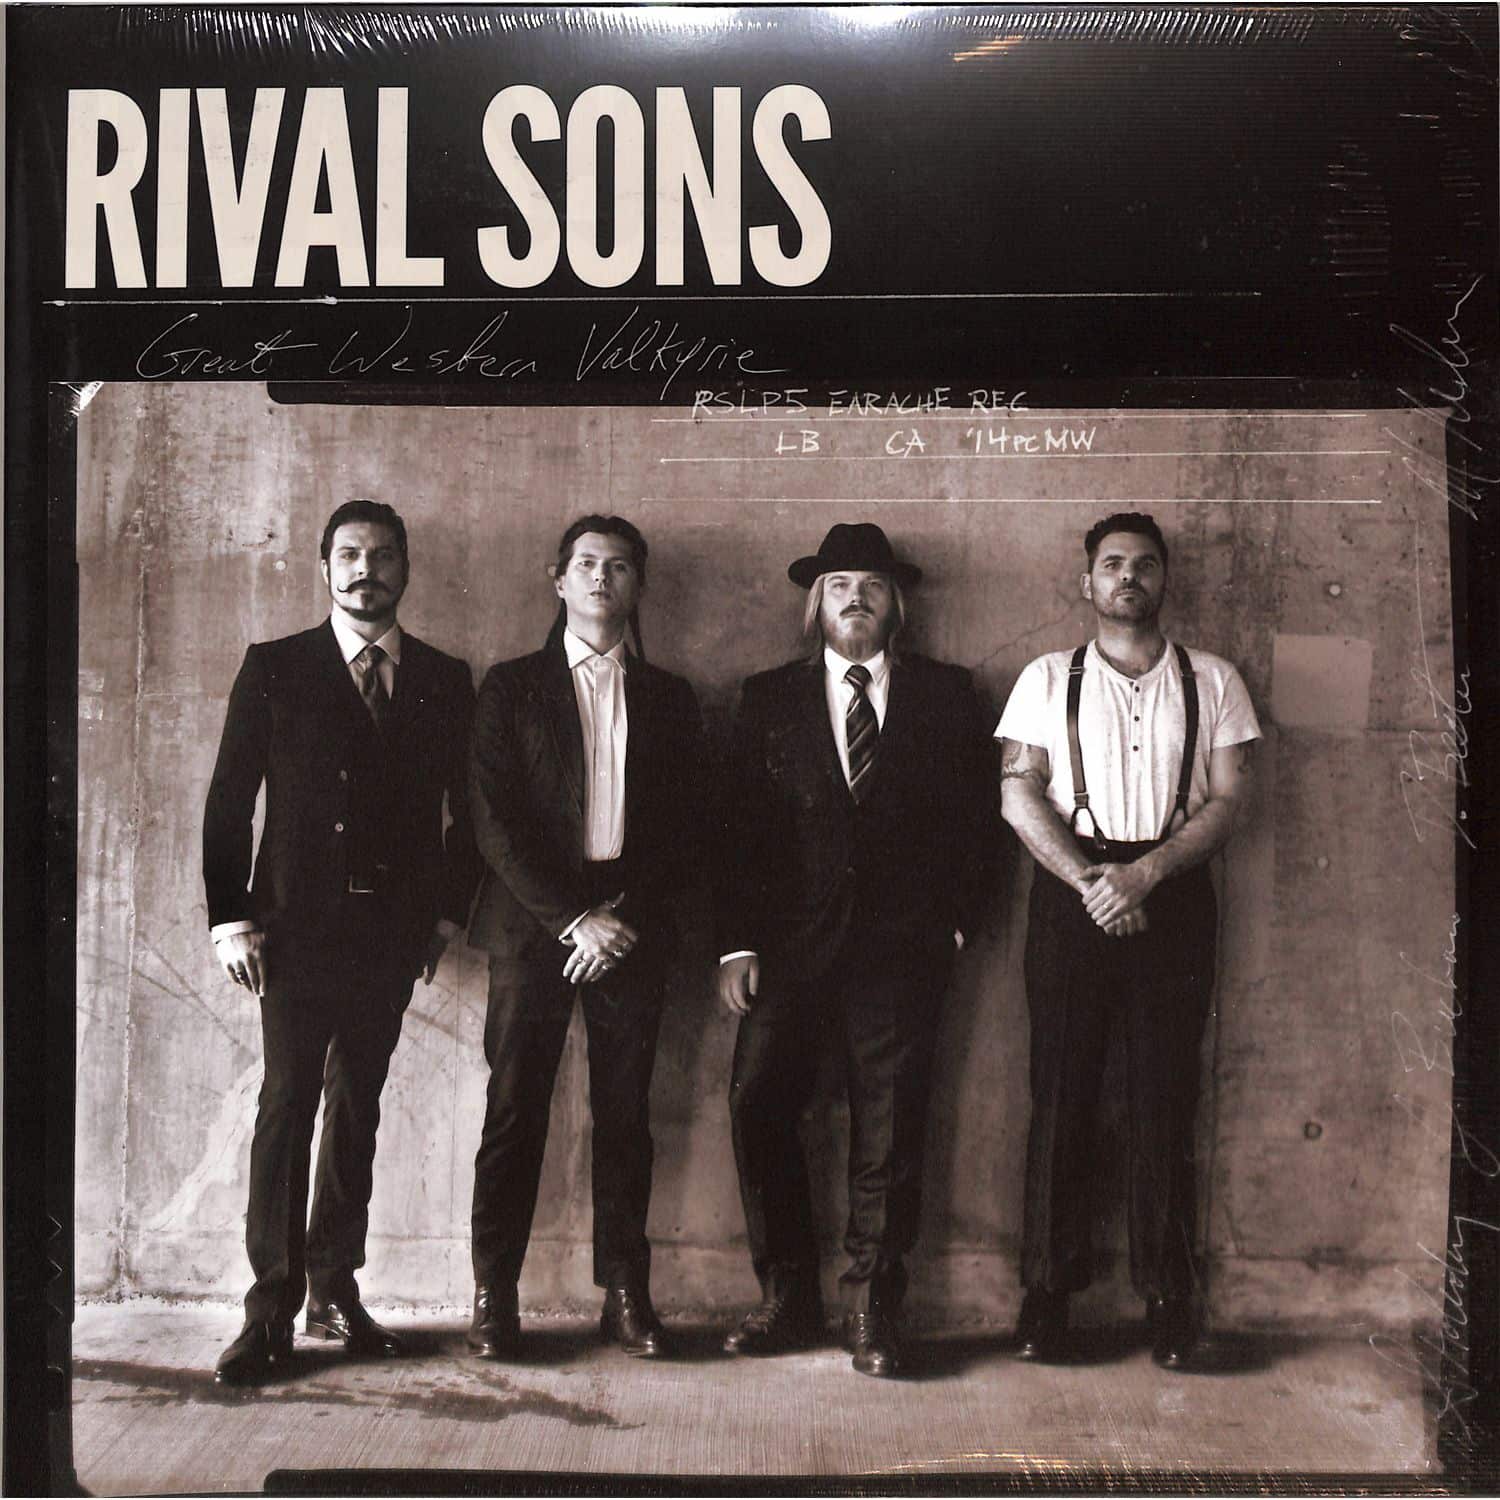 Rival Sons - GREAT WESTERN VALKYRIE 